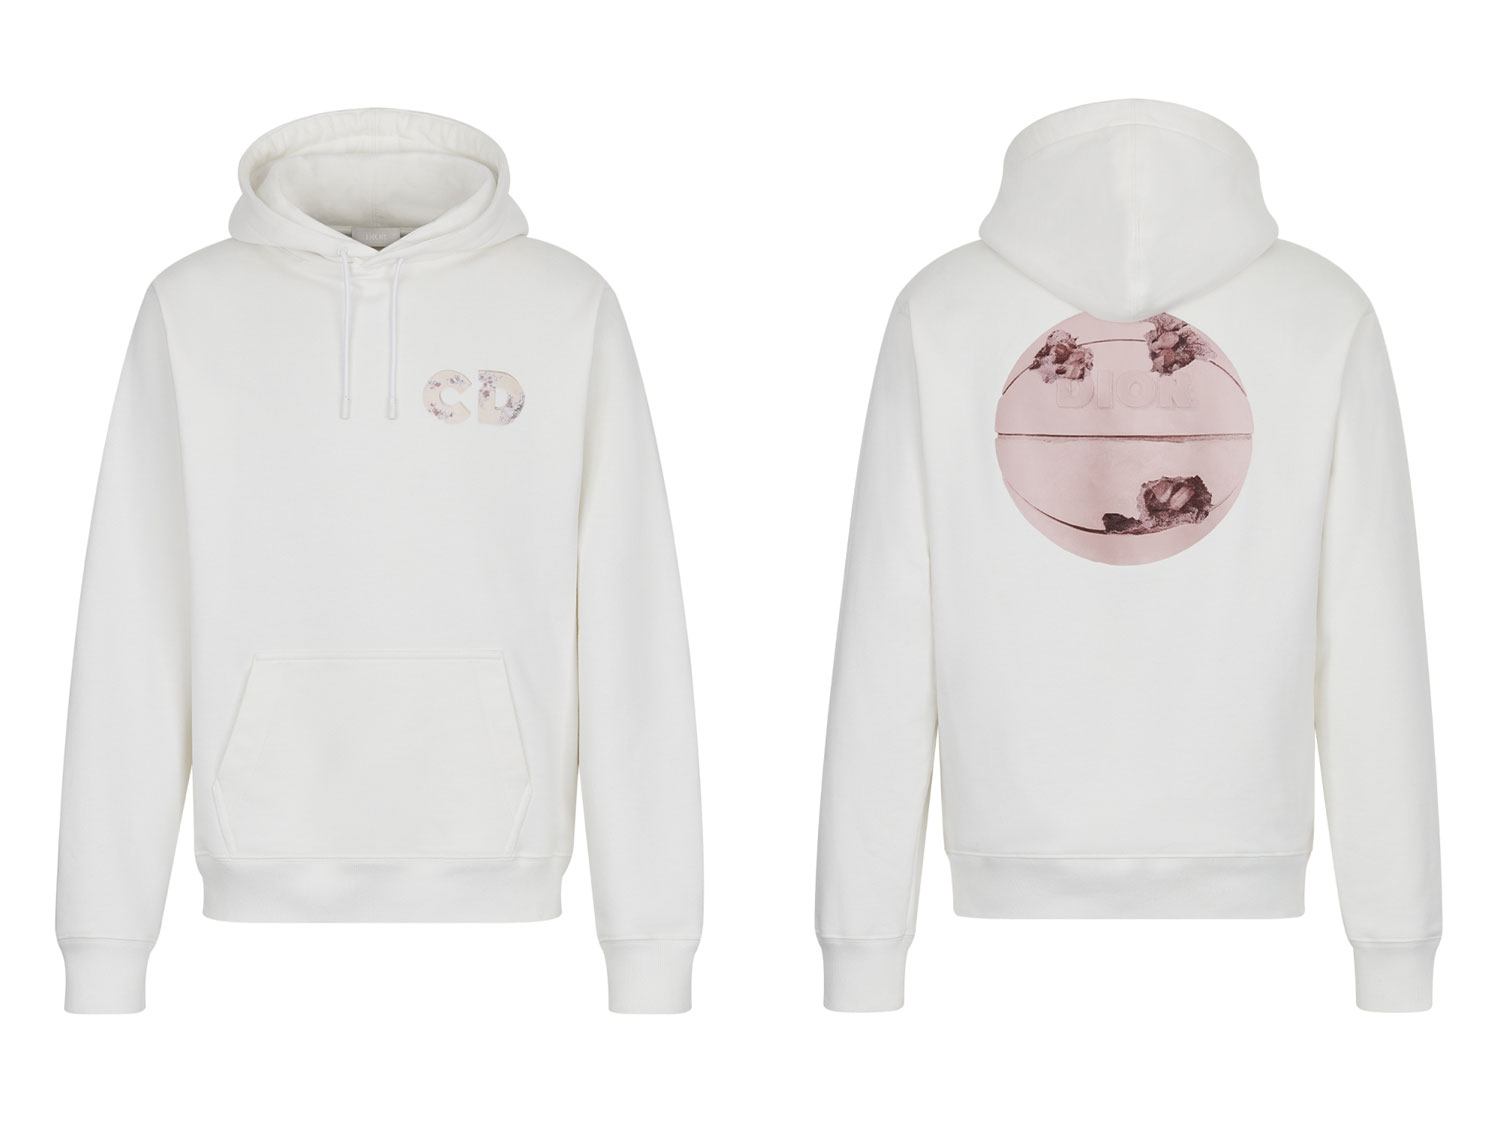 An oversized sweatshirt with 3D Eroded Dior and Daniel Arsham print, shown front and back.